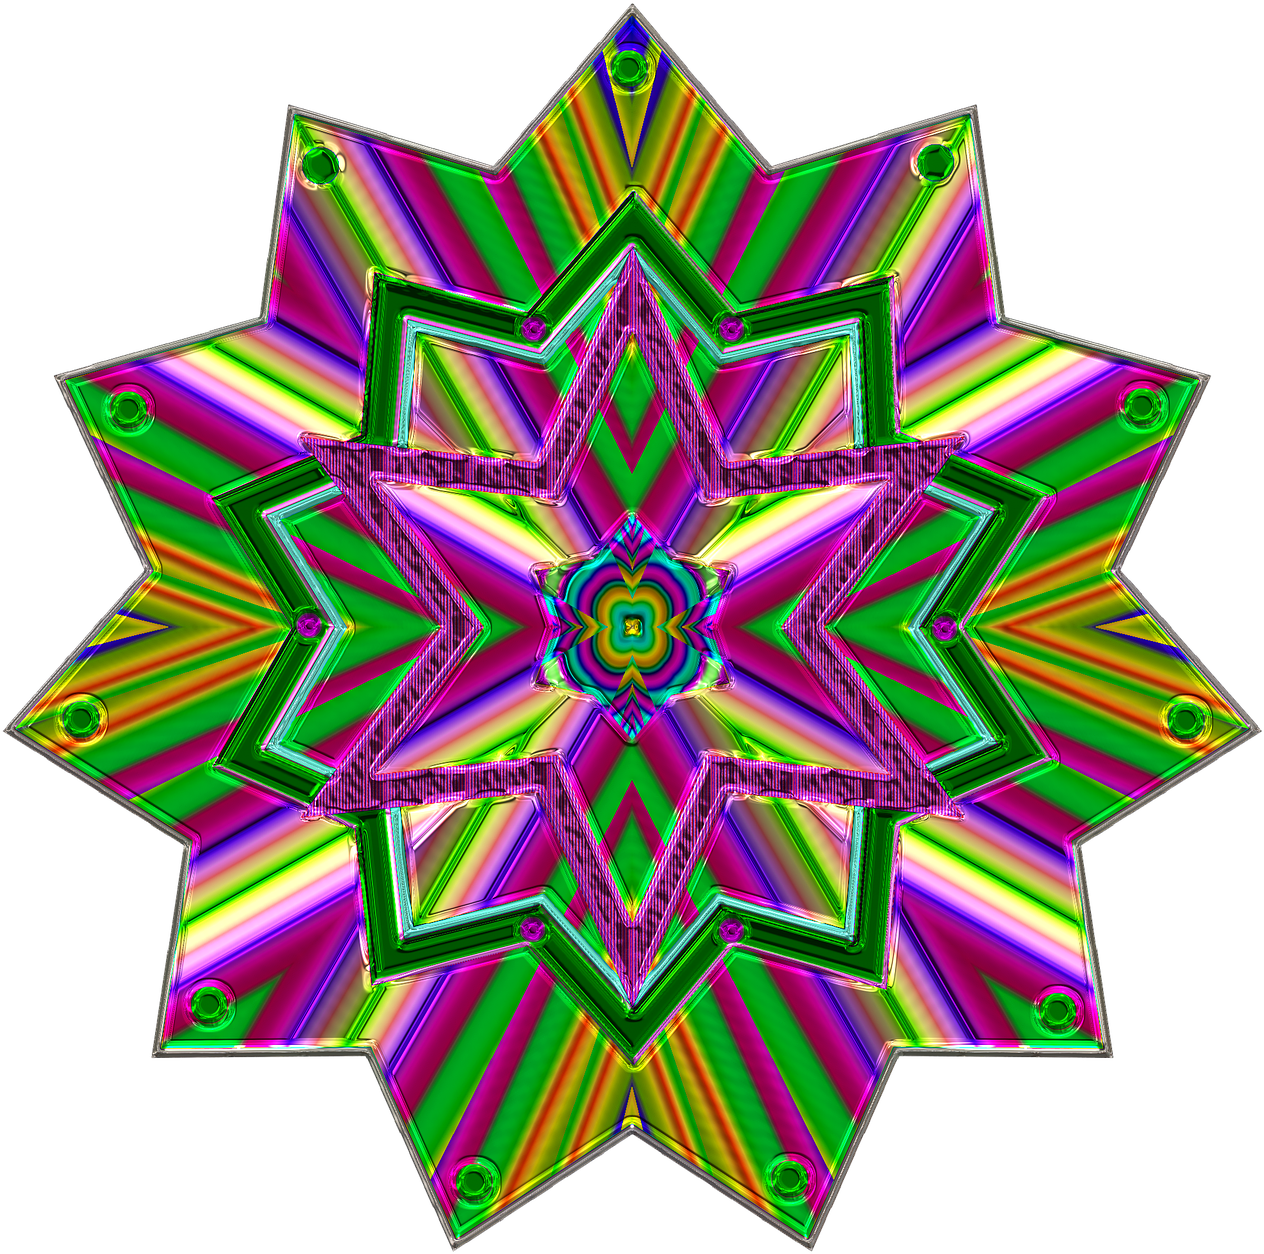 A Colorful Star Shaped Object PNG